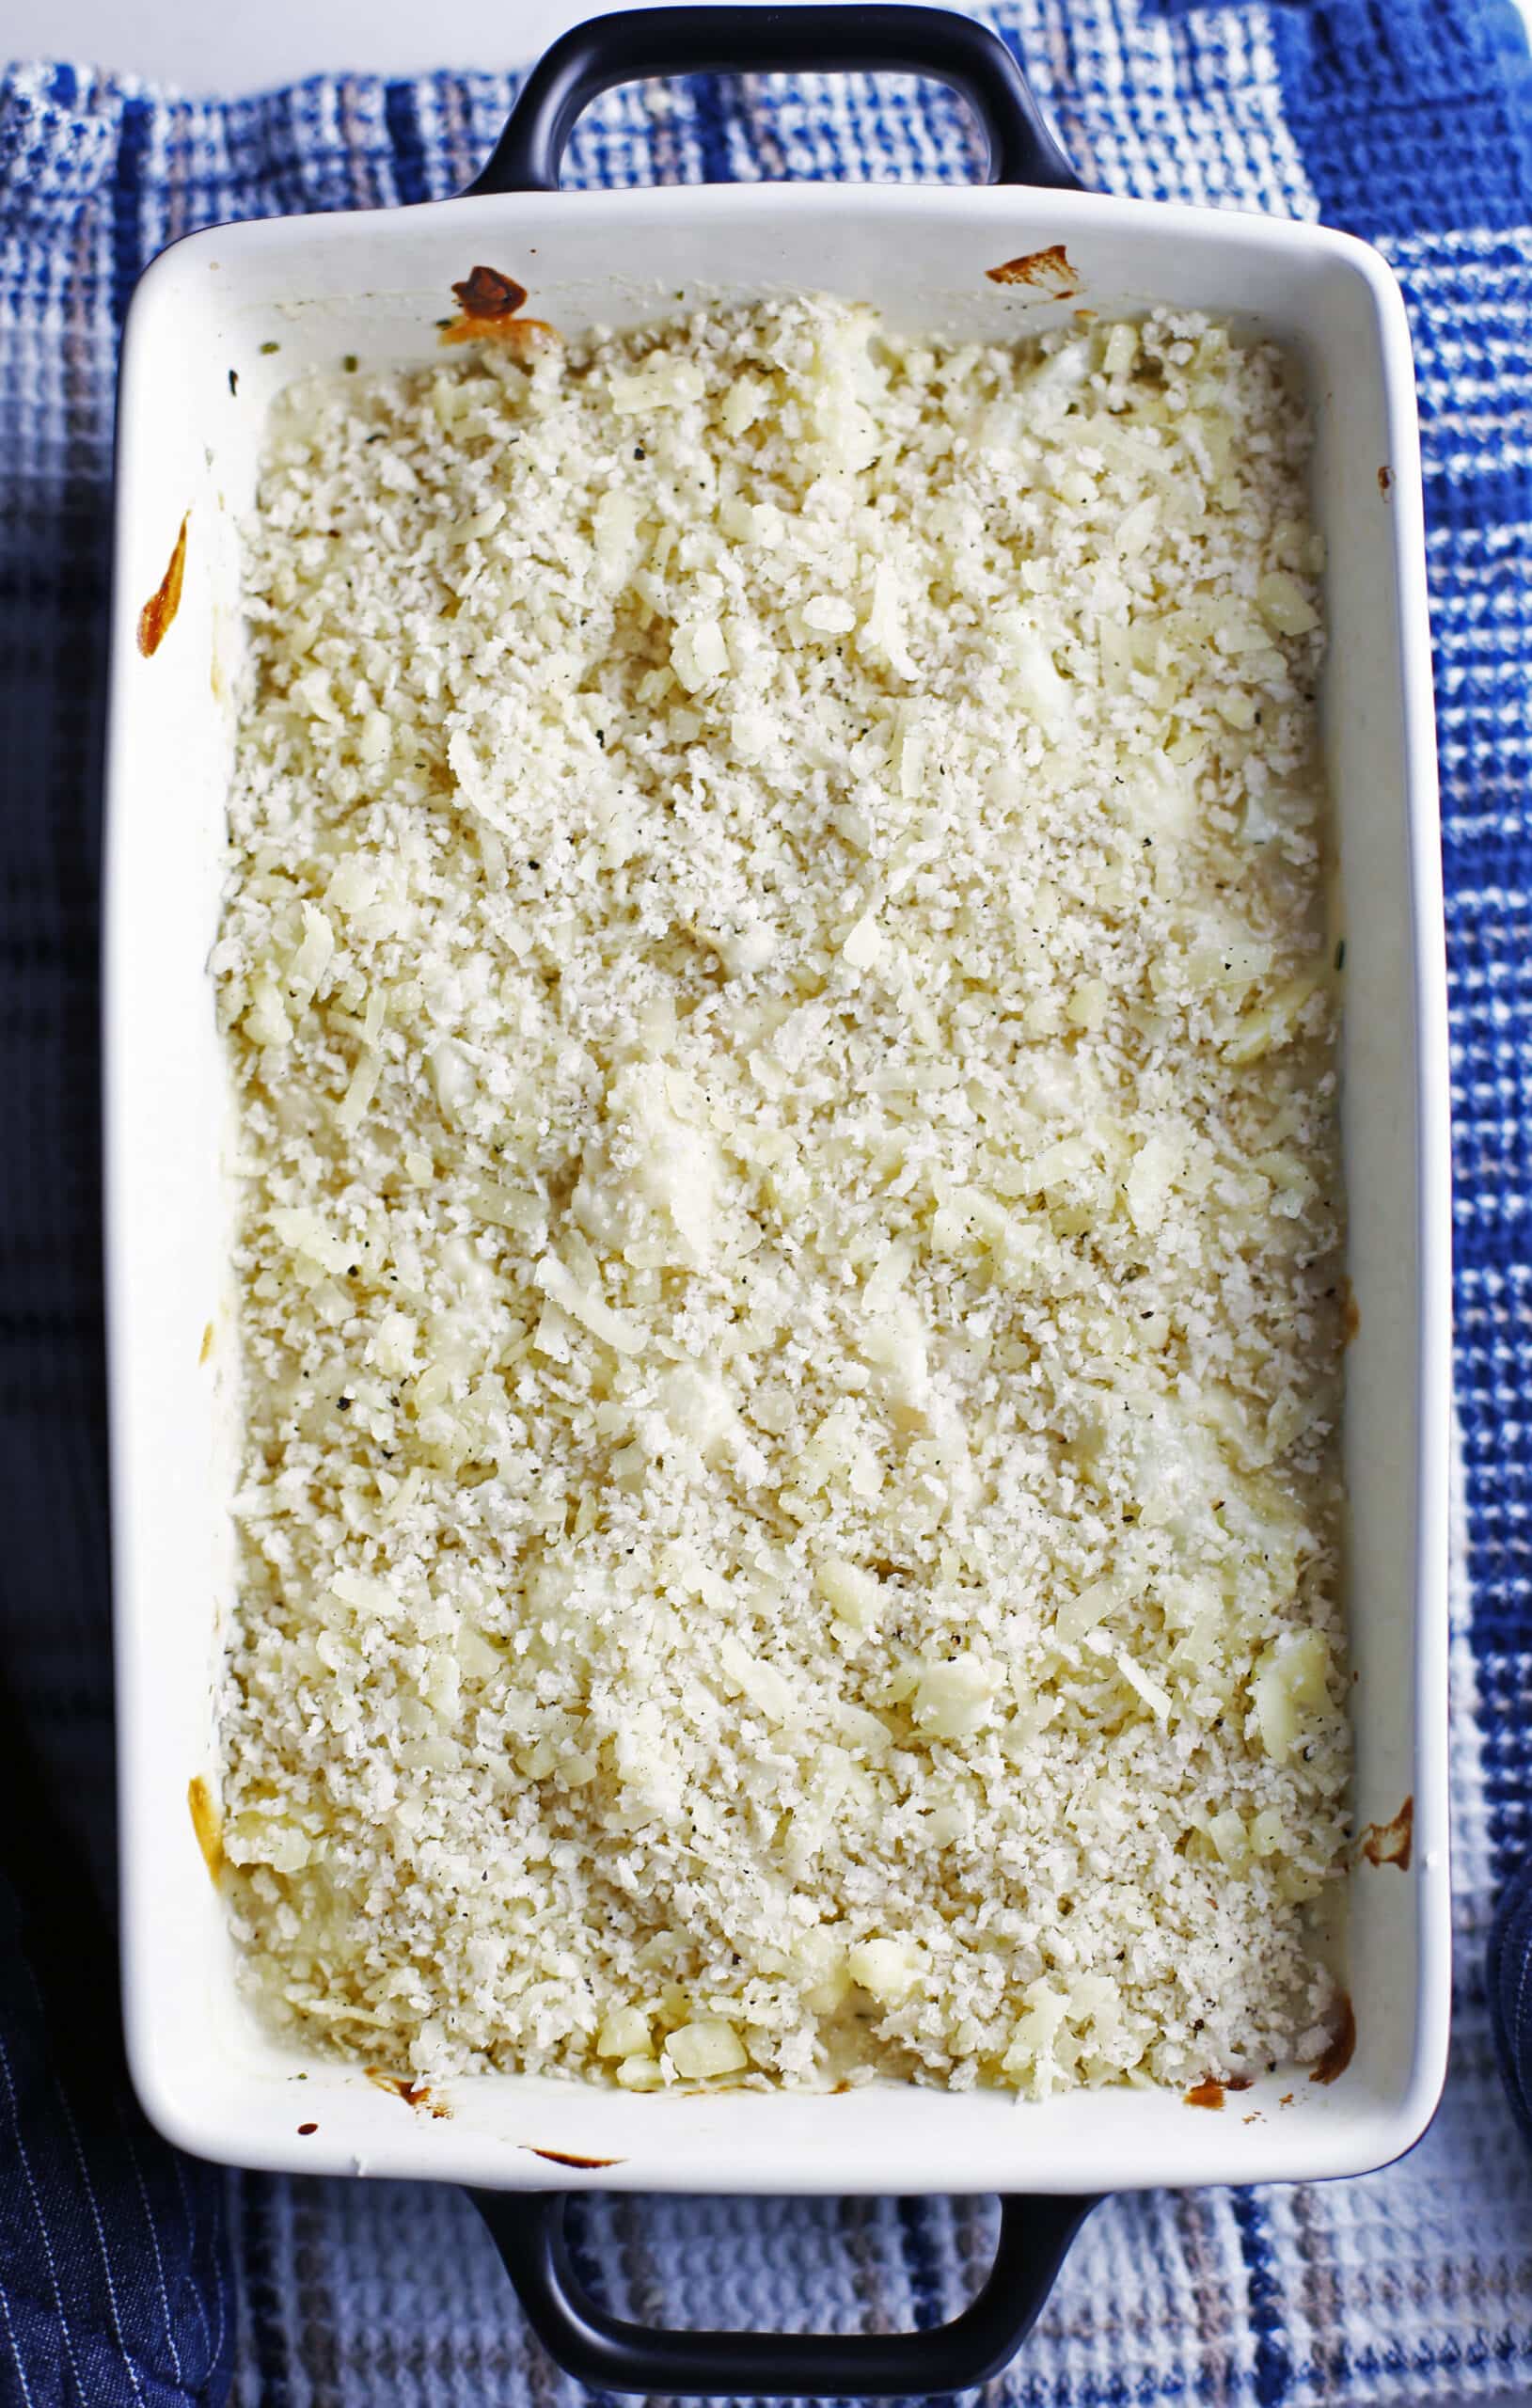 Cauliflower gratin with breadcrumbs in a casserole dish ready to be baked.